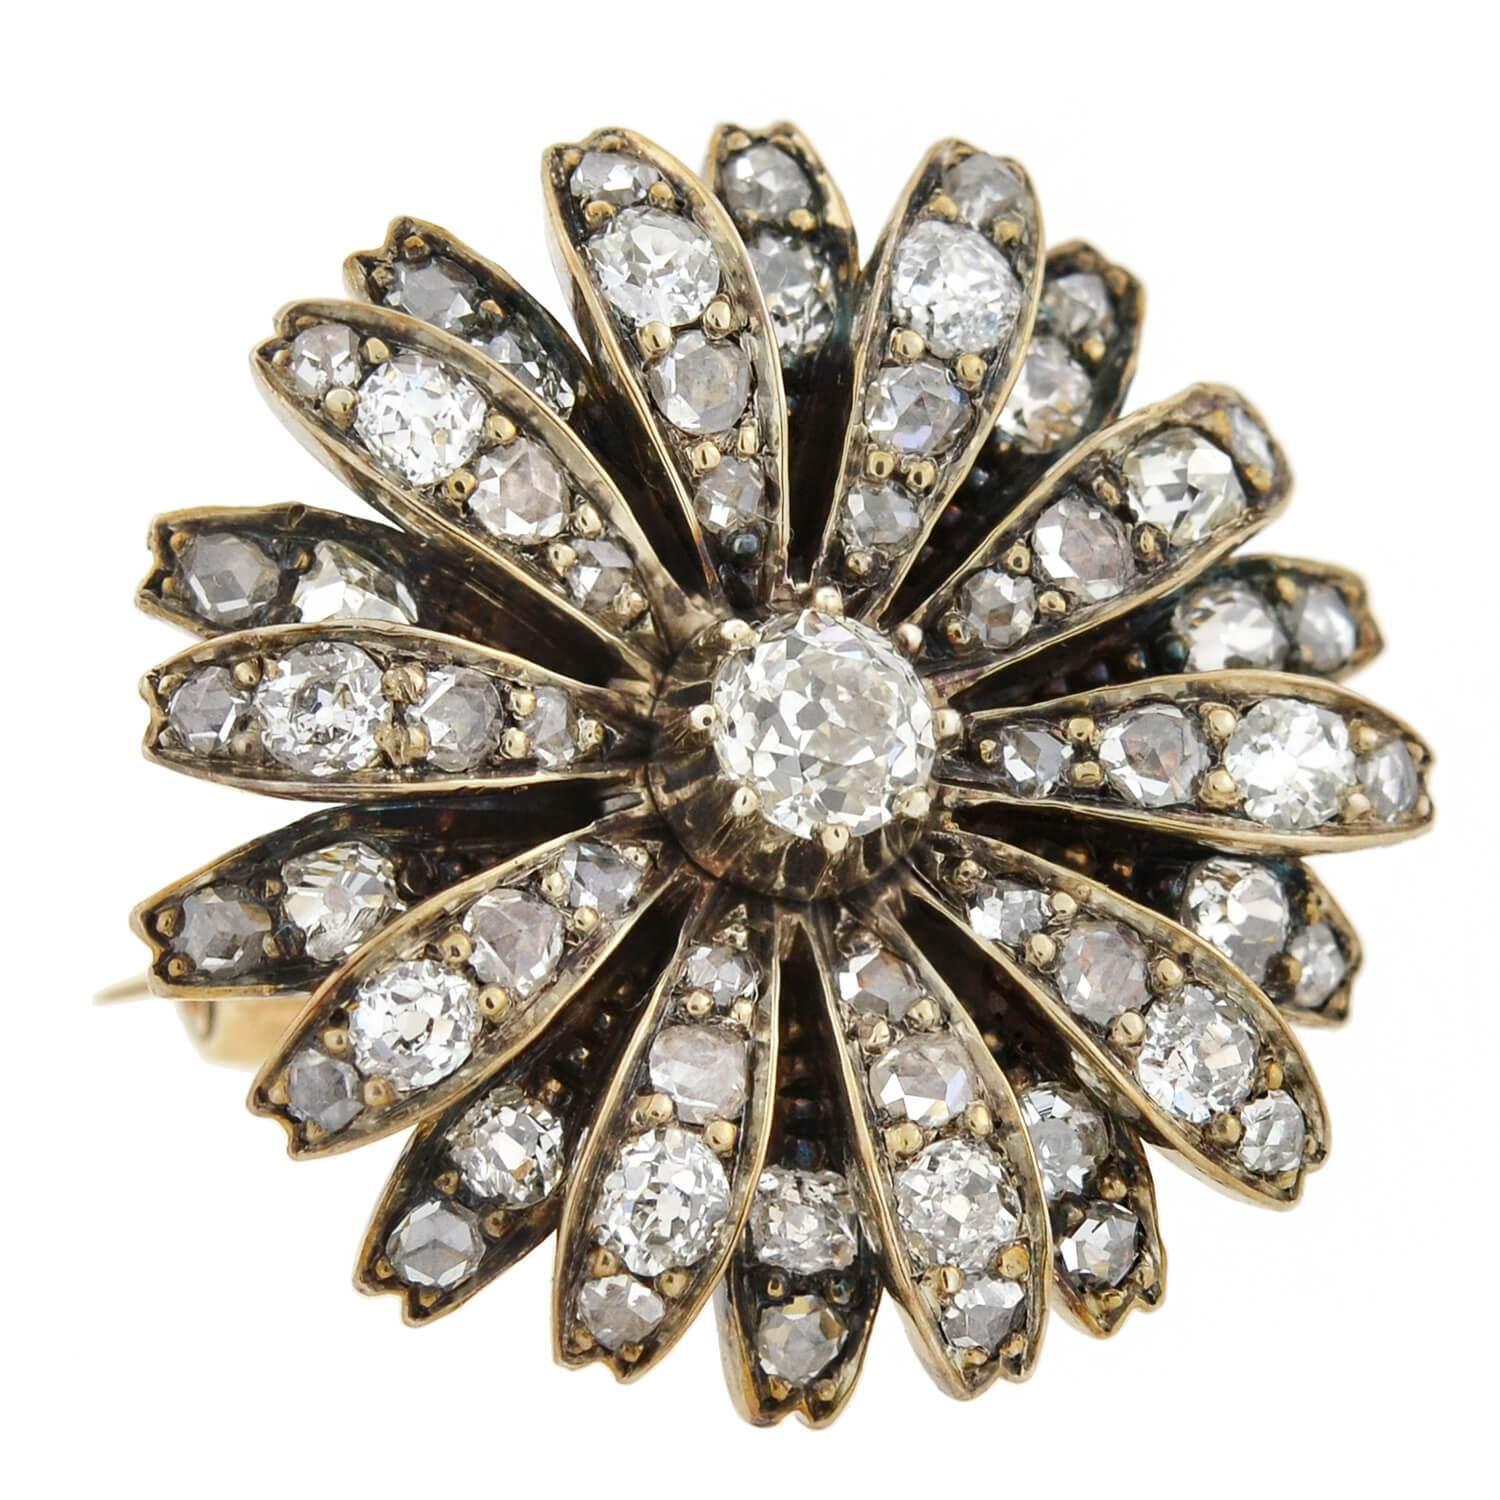 A beautiful diamond flower pin/pendant from the Victorian (ca1880) era! This exquisite sterling topped 14kt yellow gold piece is adorned with a double layer of diamond encrusted petals that surround a larger old Mine Cut diamond at the center. A